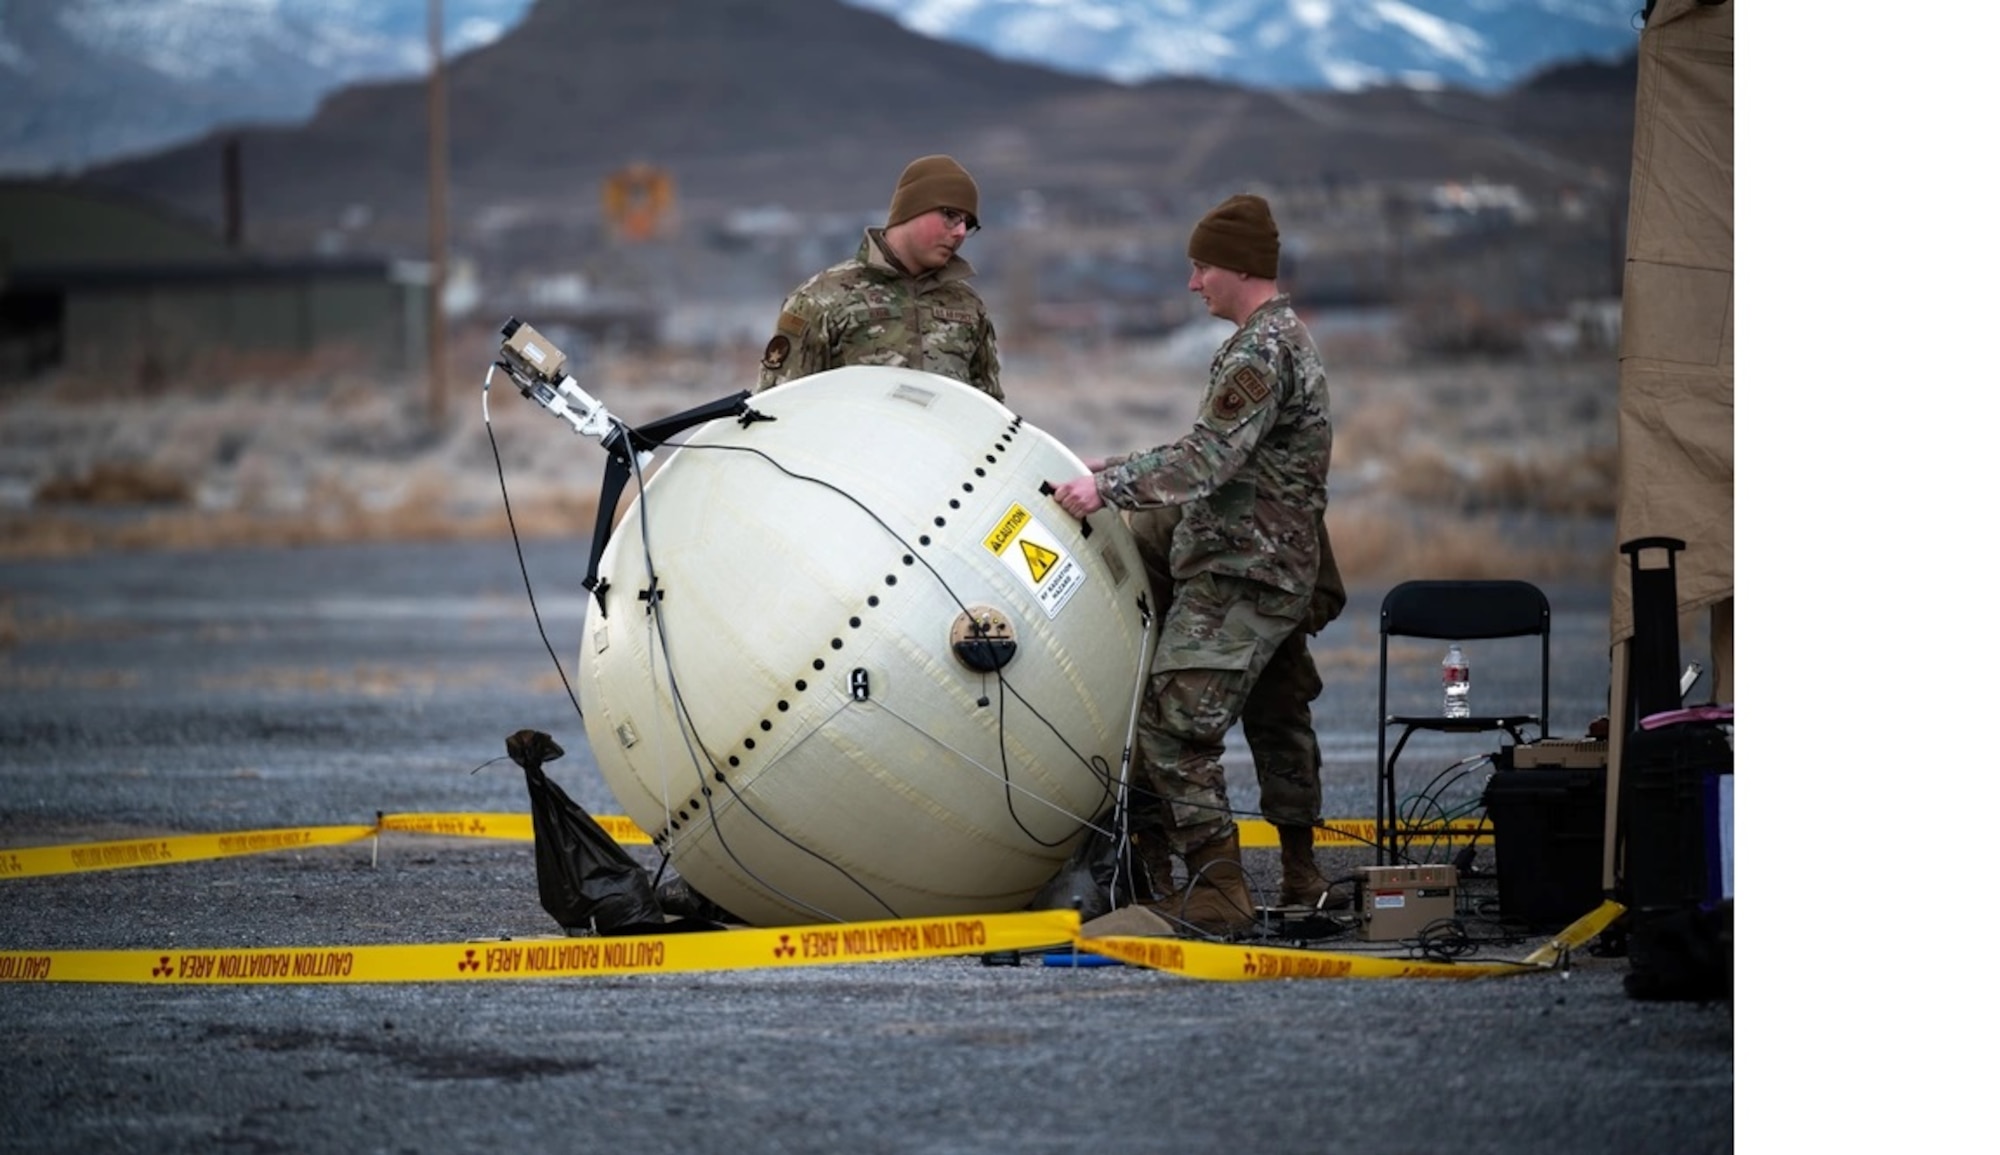 U.S. Air Force Senior Airman Andrey Almann, a Tactical Communications specialist, watches Staff Sgt. Alex Hoover, a Tactical Communications supervisor both assigned to the 27th Special Operations Communications Squadron, align a GATR SATCOM terminal during exercise Emerald Warrior 24 at Wendover Airport, Utah, March 5, 2024. Emerald Warrior provides annual realistic, relevant, high-end pre-deployment training in a complex and evolving security environment using all aspects of live, virtual and constructive training aspects. (U.S. Air Force photo by Senior Airman Keegan Putman)